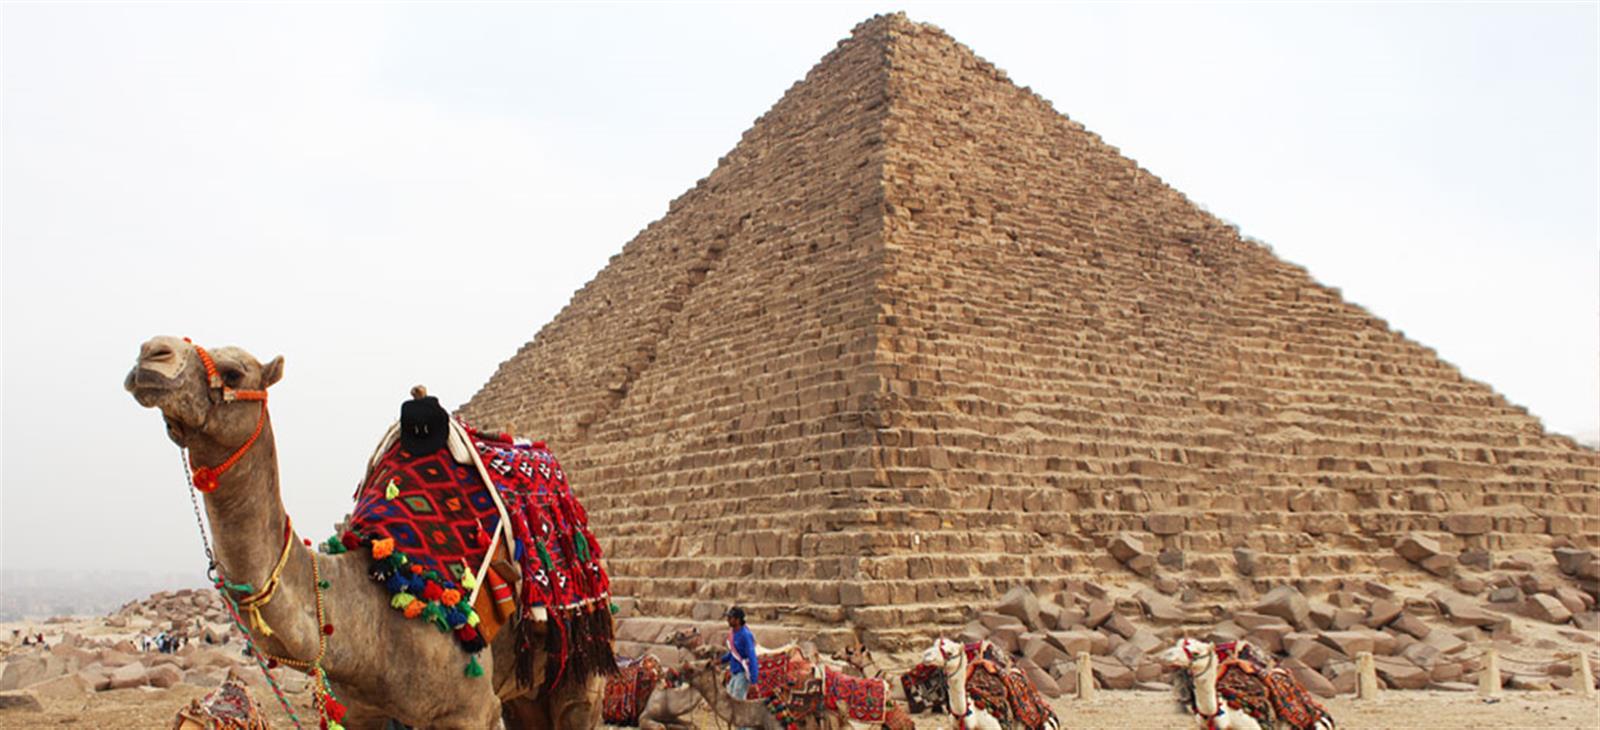 two days tours in alexandria and pyramids from alexandria port